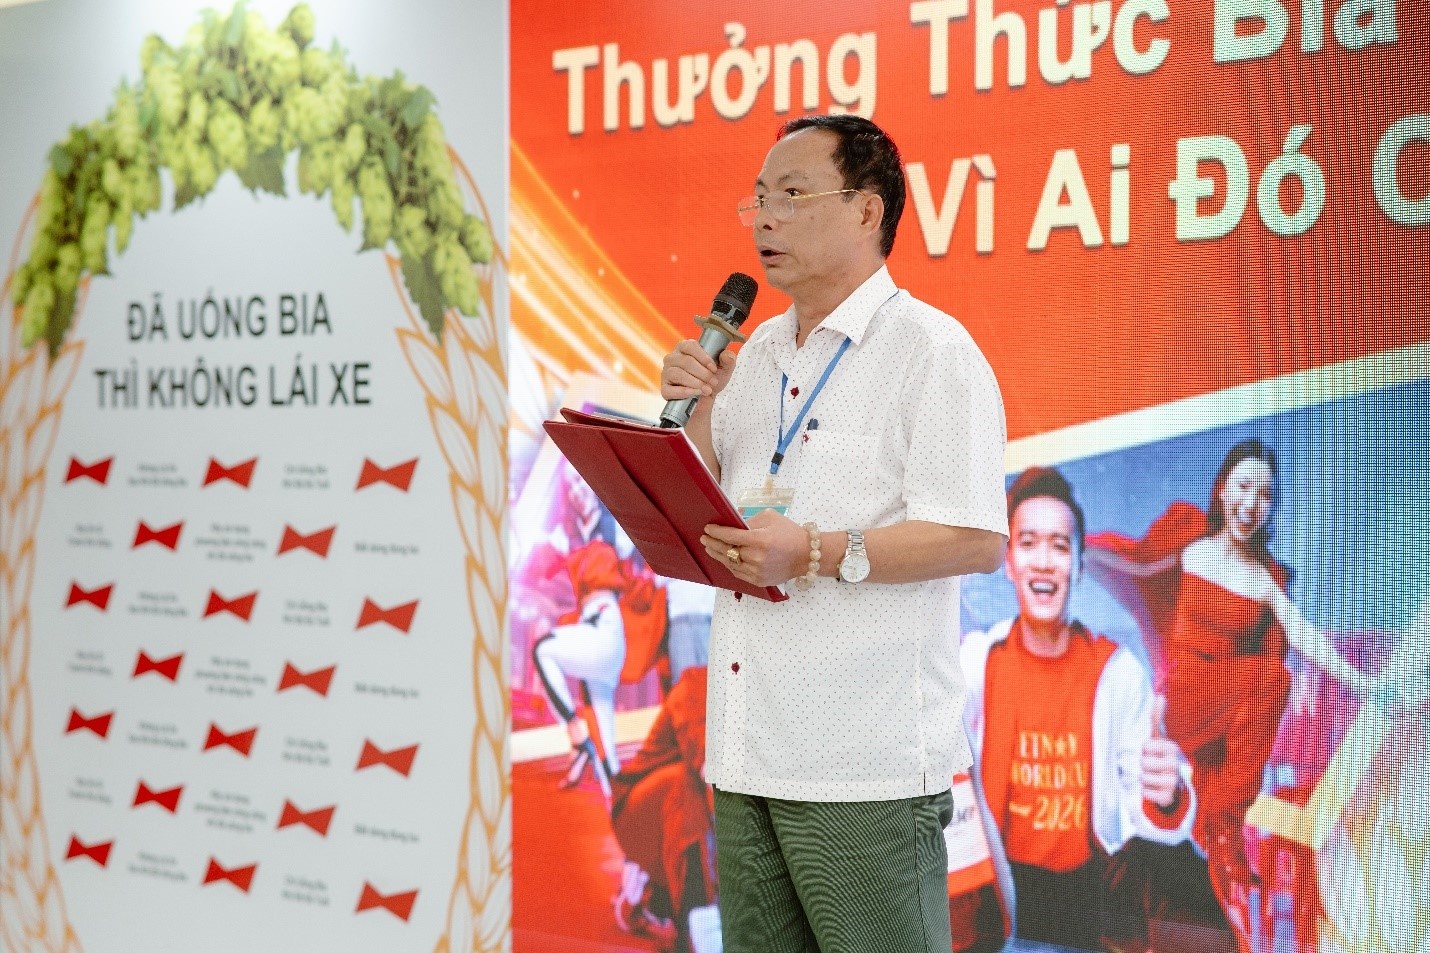 AB InBev continues to promote Global Smart Drinking culture in Hoa Binh